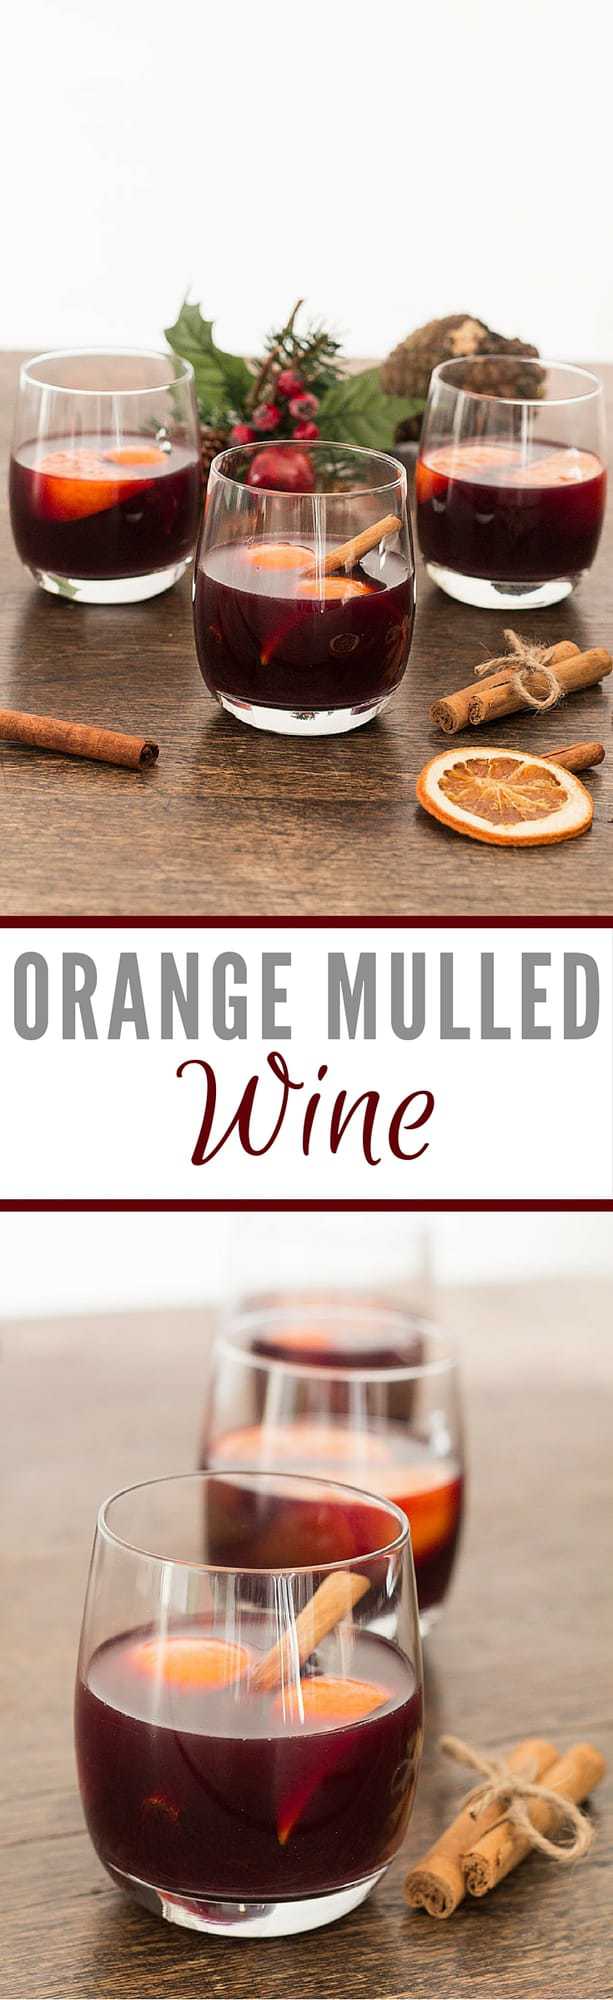 Orange Mulled Wine | Recipes From A Pantry